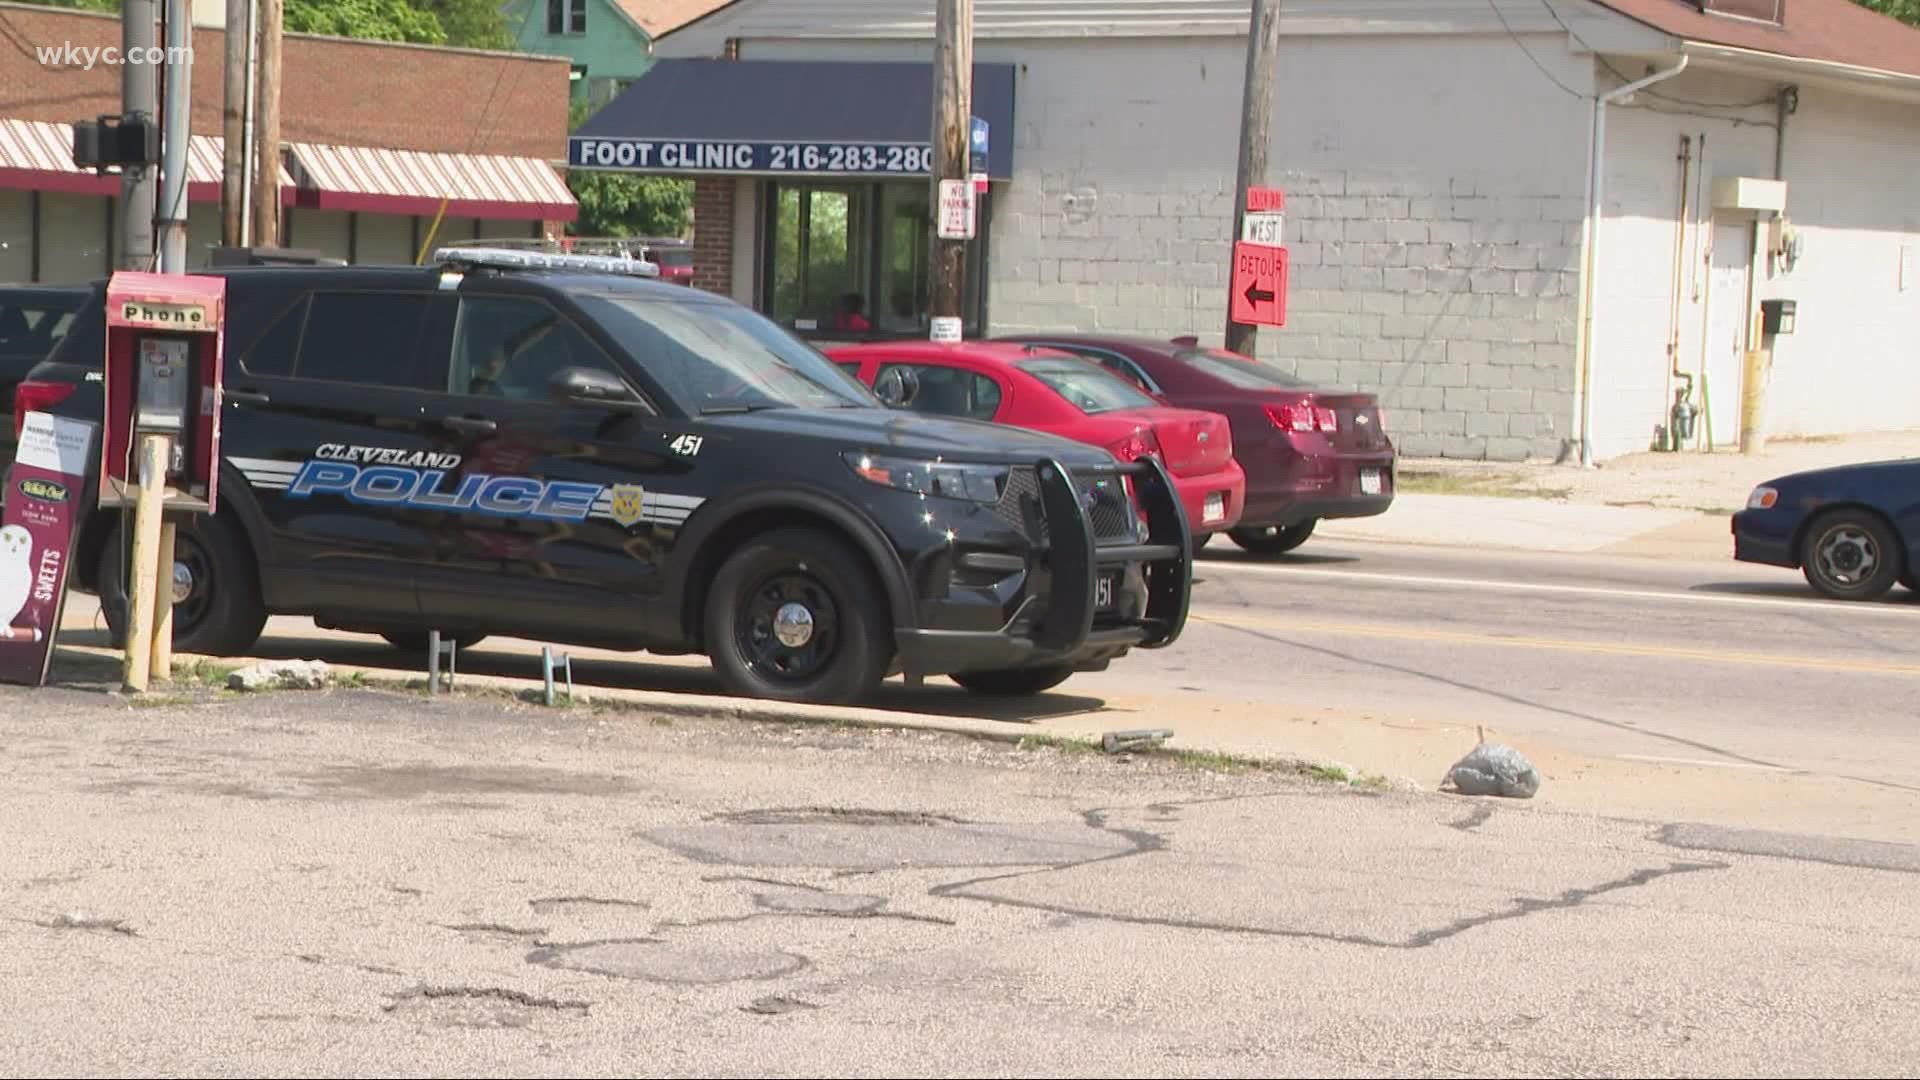 Experts discuss the rising numbers of homicides in Cleveland. Marisa Saenz reports.